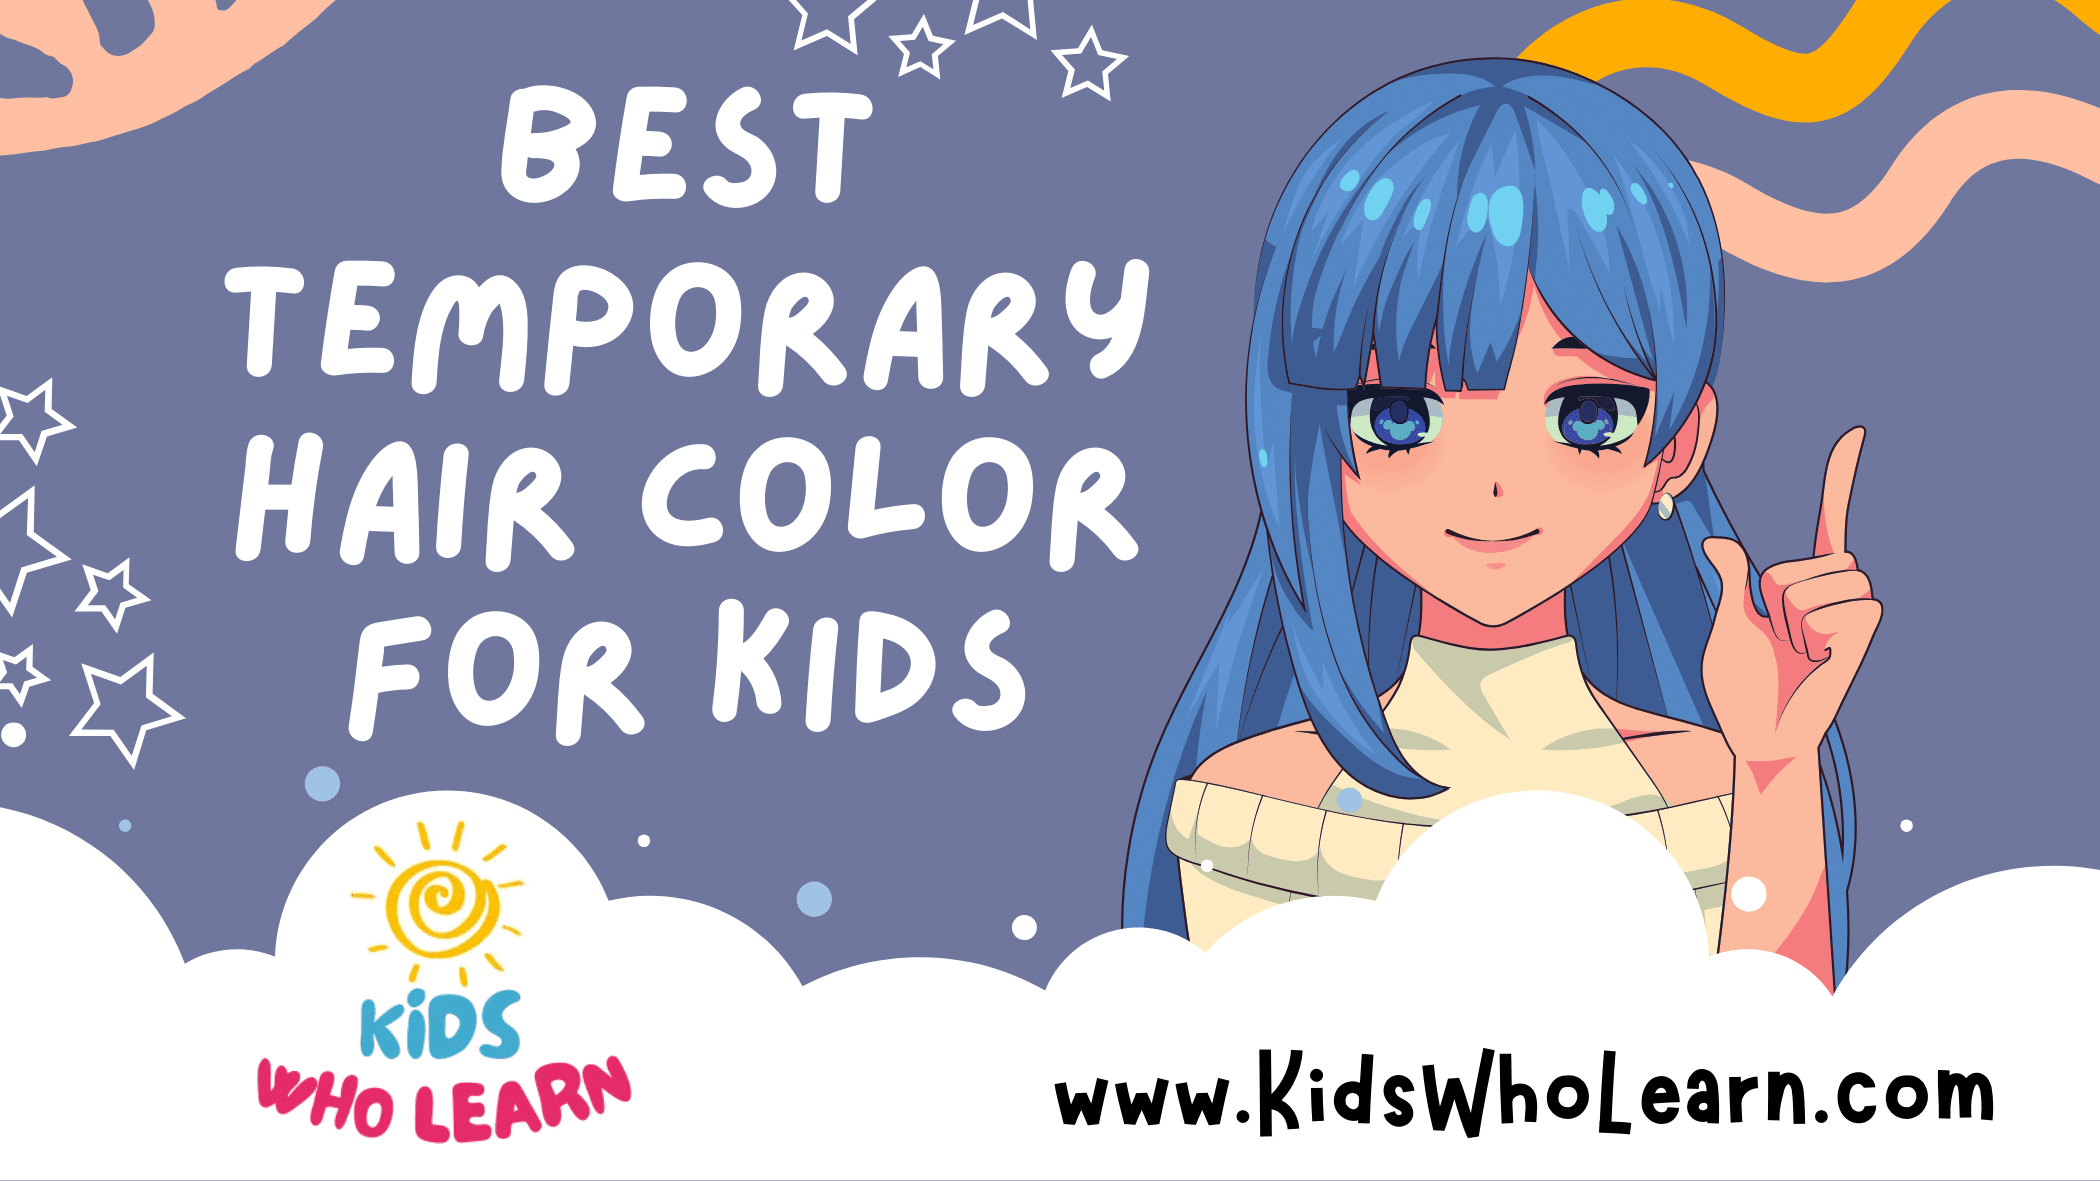 Best Temporary Hair Color For Kids